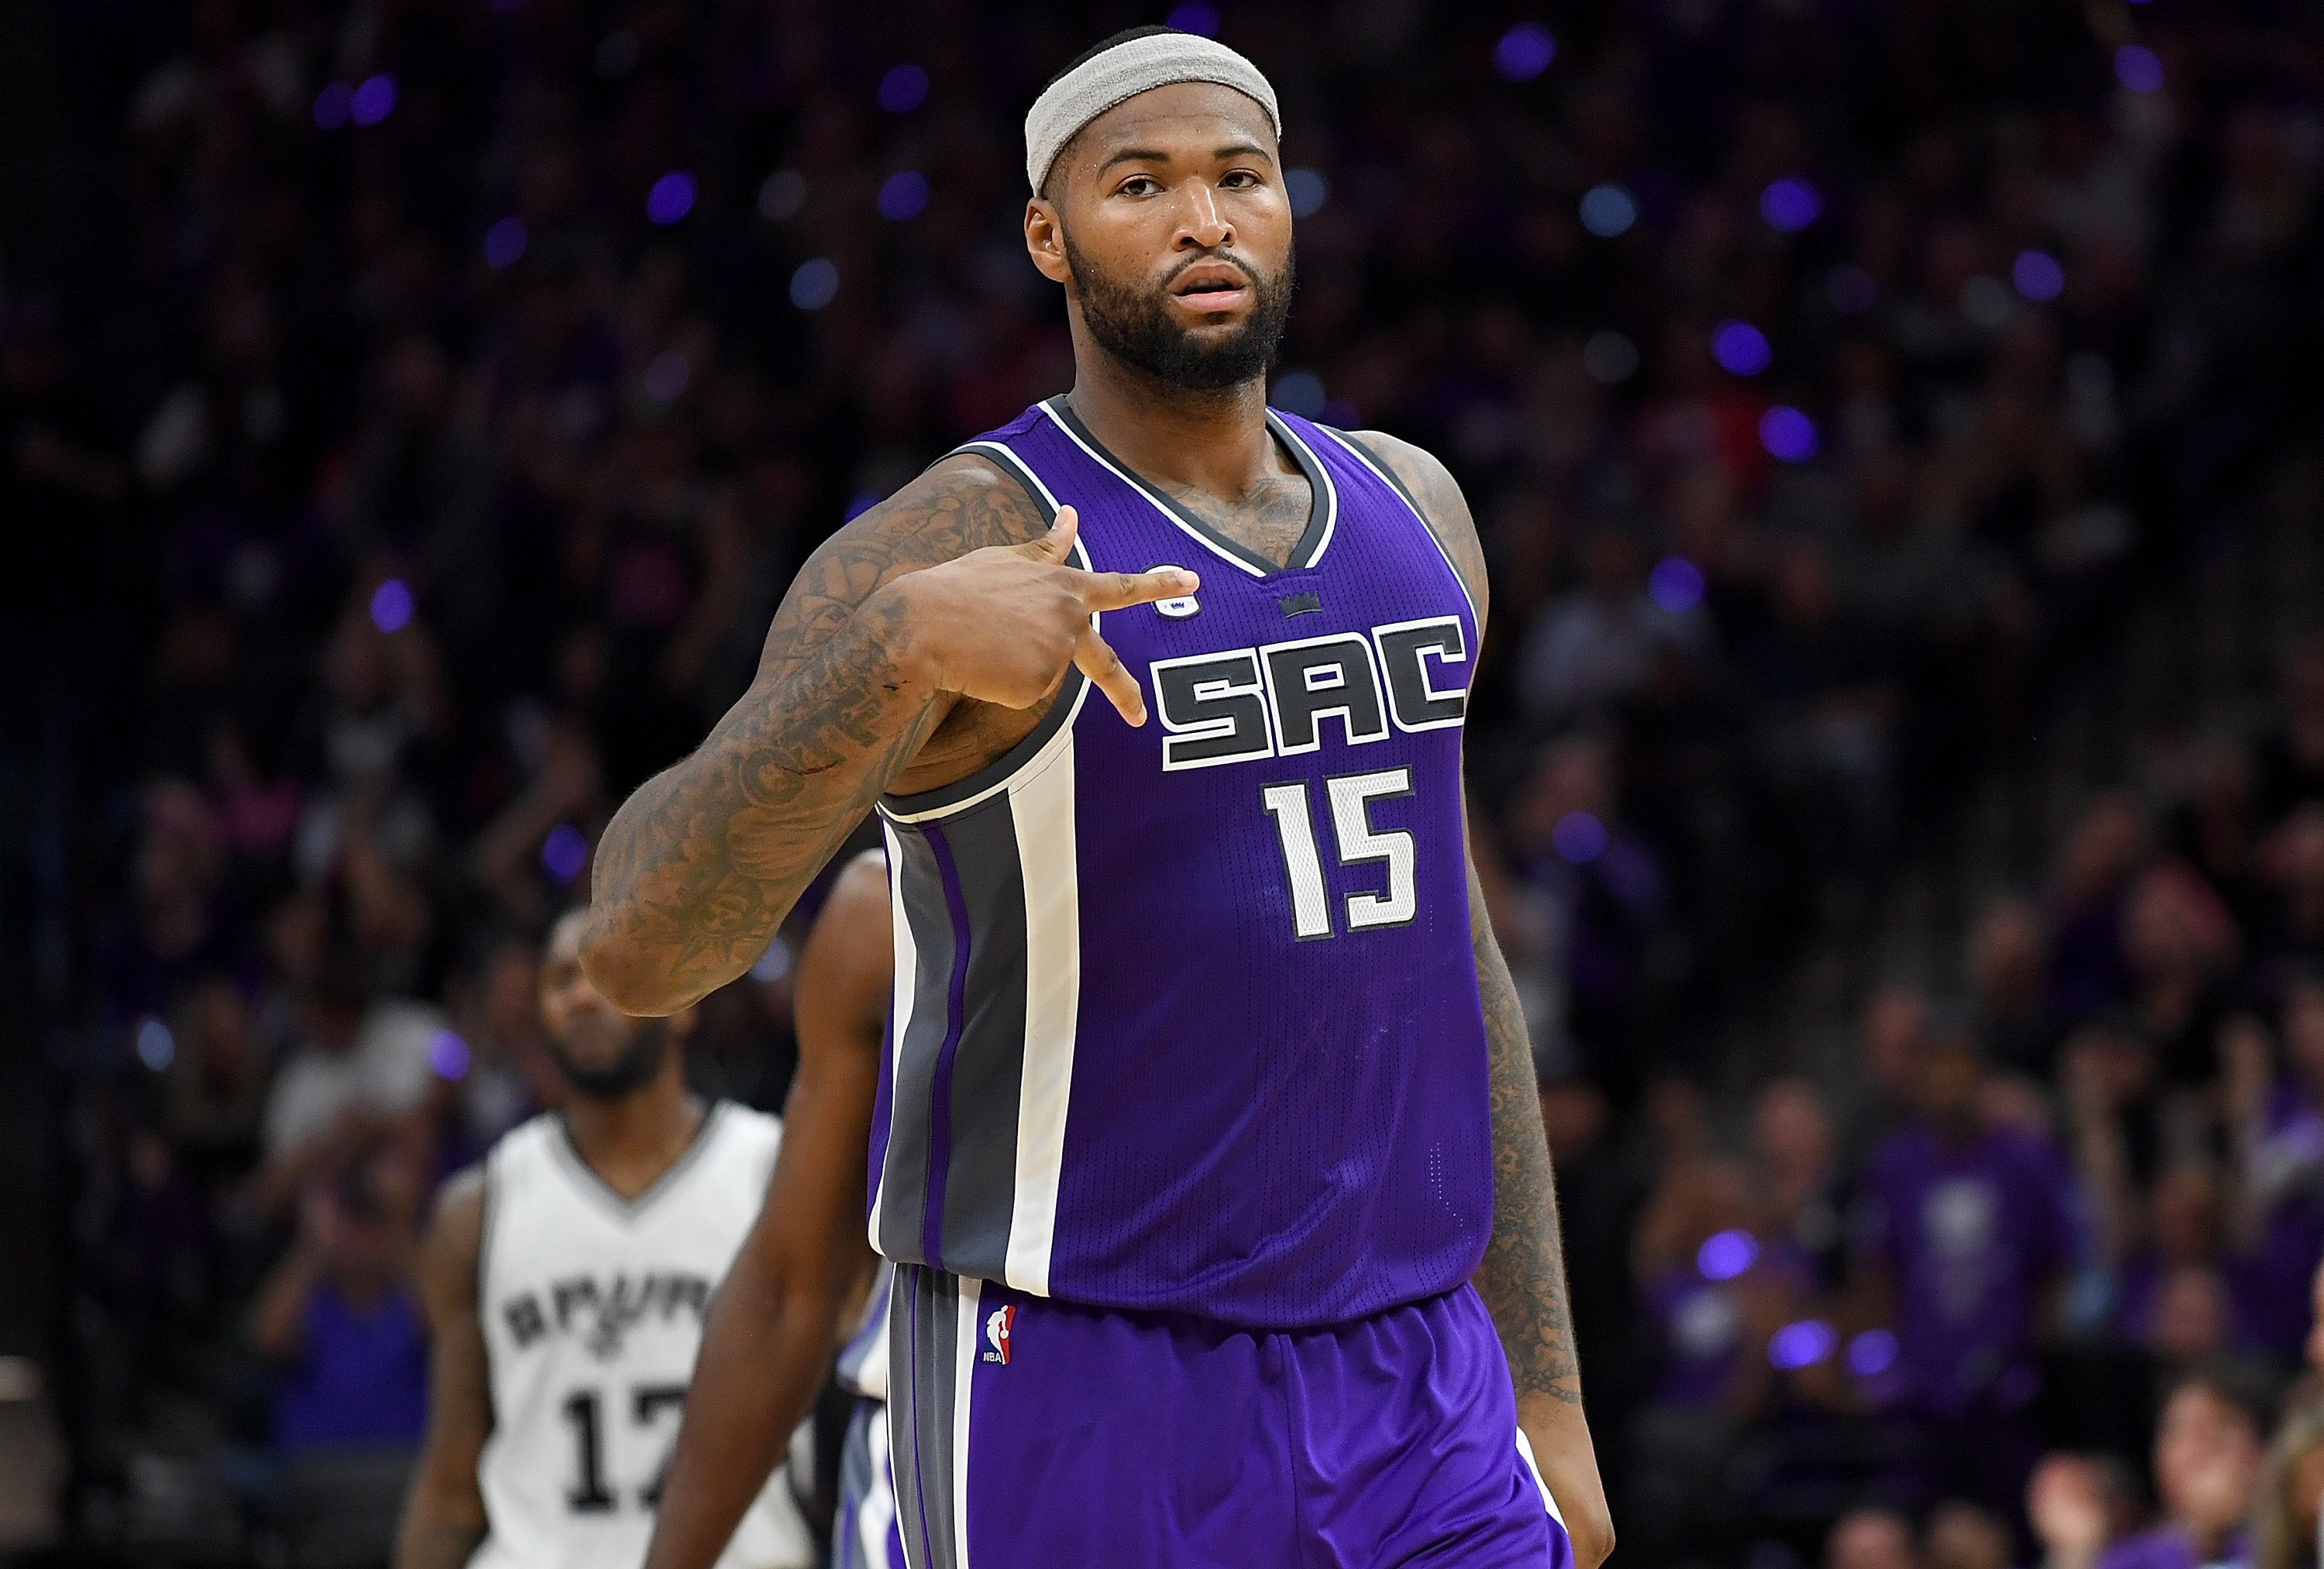 SACRAMENTO, CA - OCTOBER 27: DeMarcus Cousins #15 of the Sacramento Kings reacts after making a three-point shot against the San Antonio Spurs during the third quarter of an NBA basketball game at Golden 1 Center on October 27, 2016 in Sacramento, California. NOTE TO USER: User expressly acknowledges and agrees that, by downloading and or using this photograph, User is consenting to the terms and conditions of the Getty Images License Agreement.   Thearon W. Henderson/Getty Images/AFP